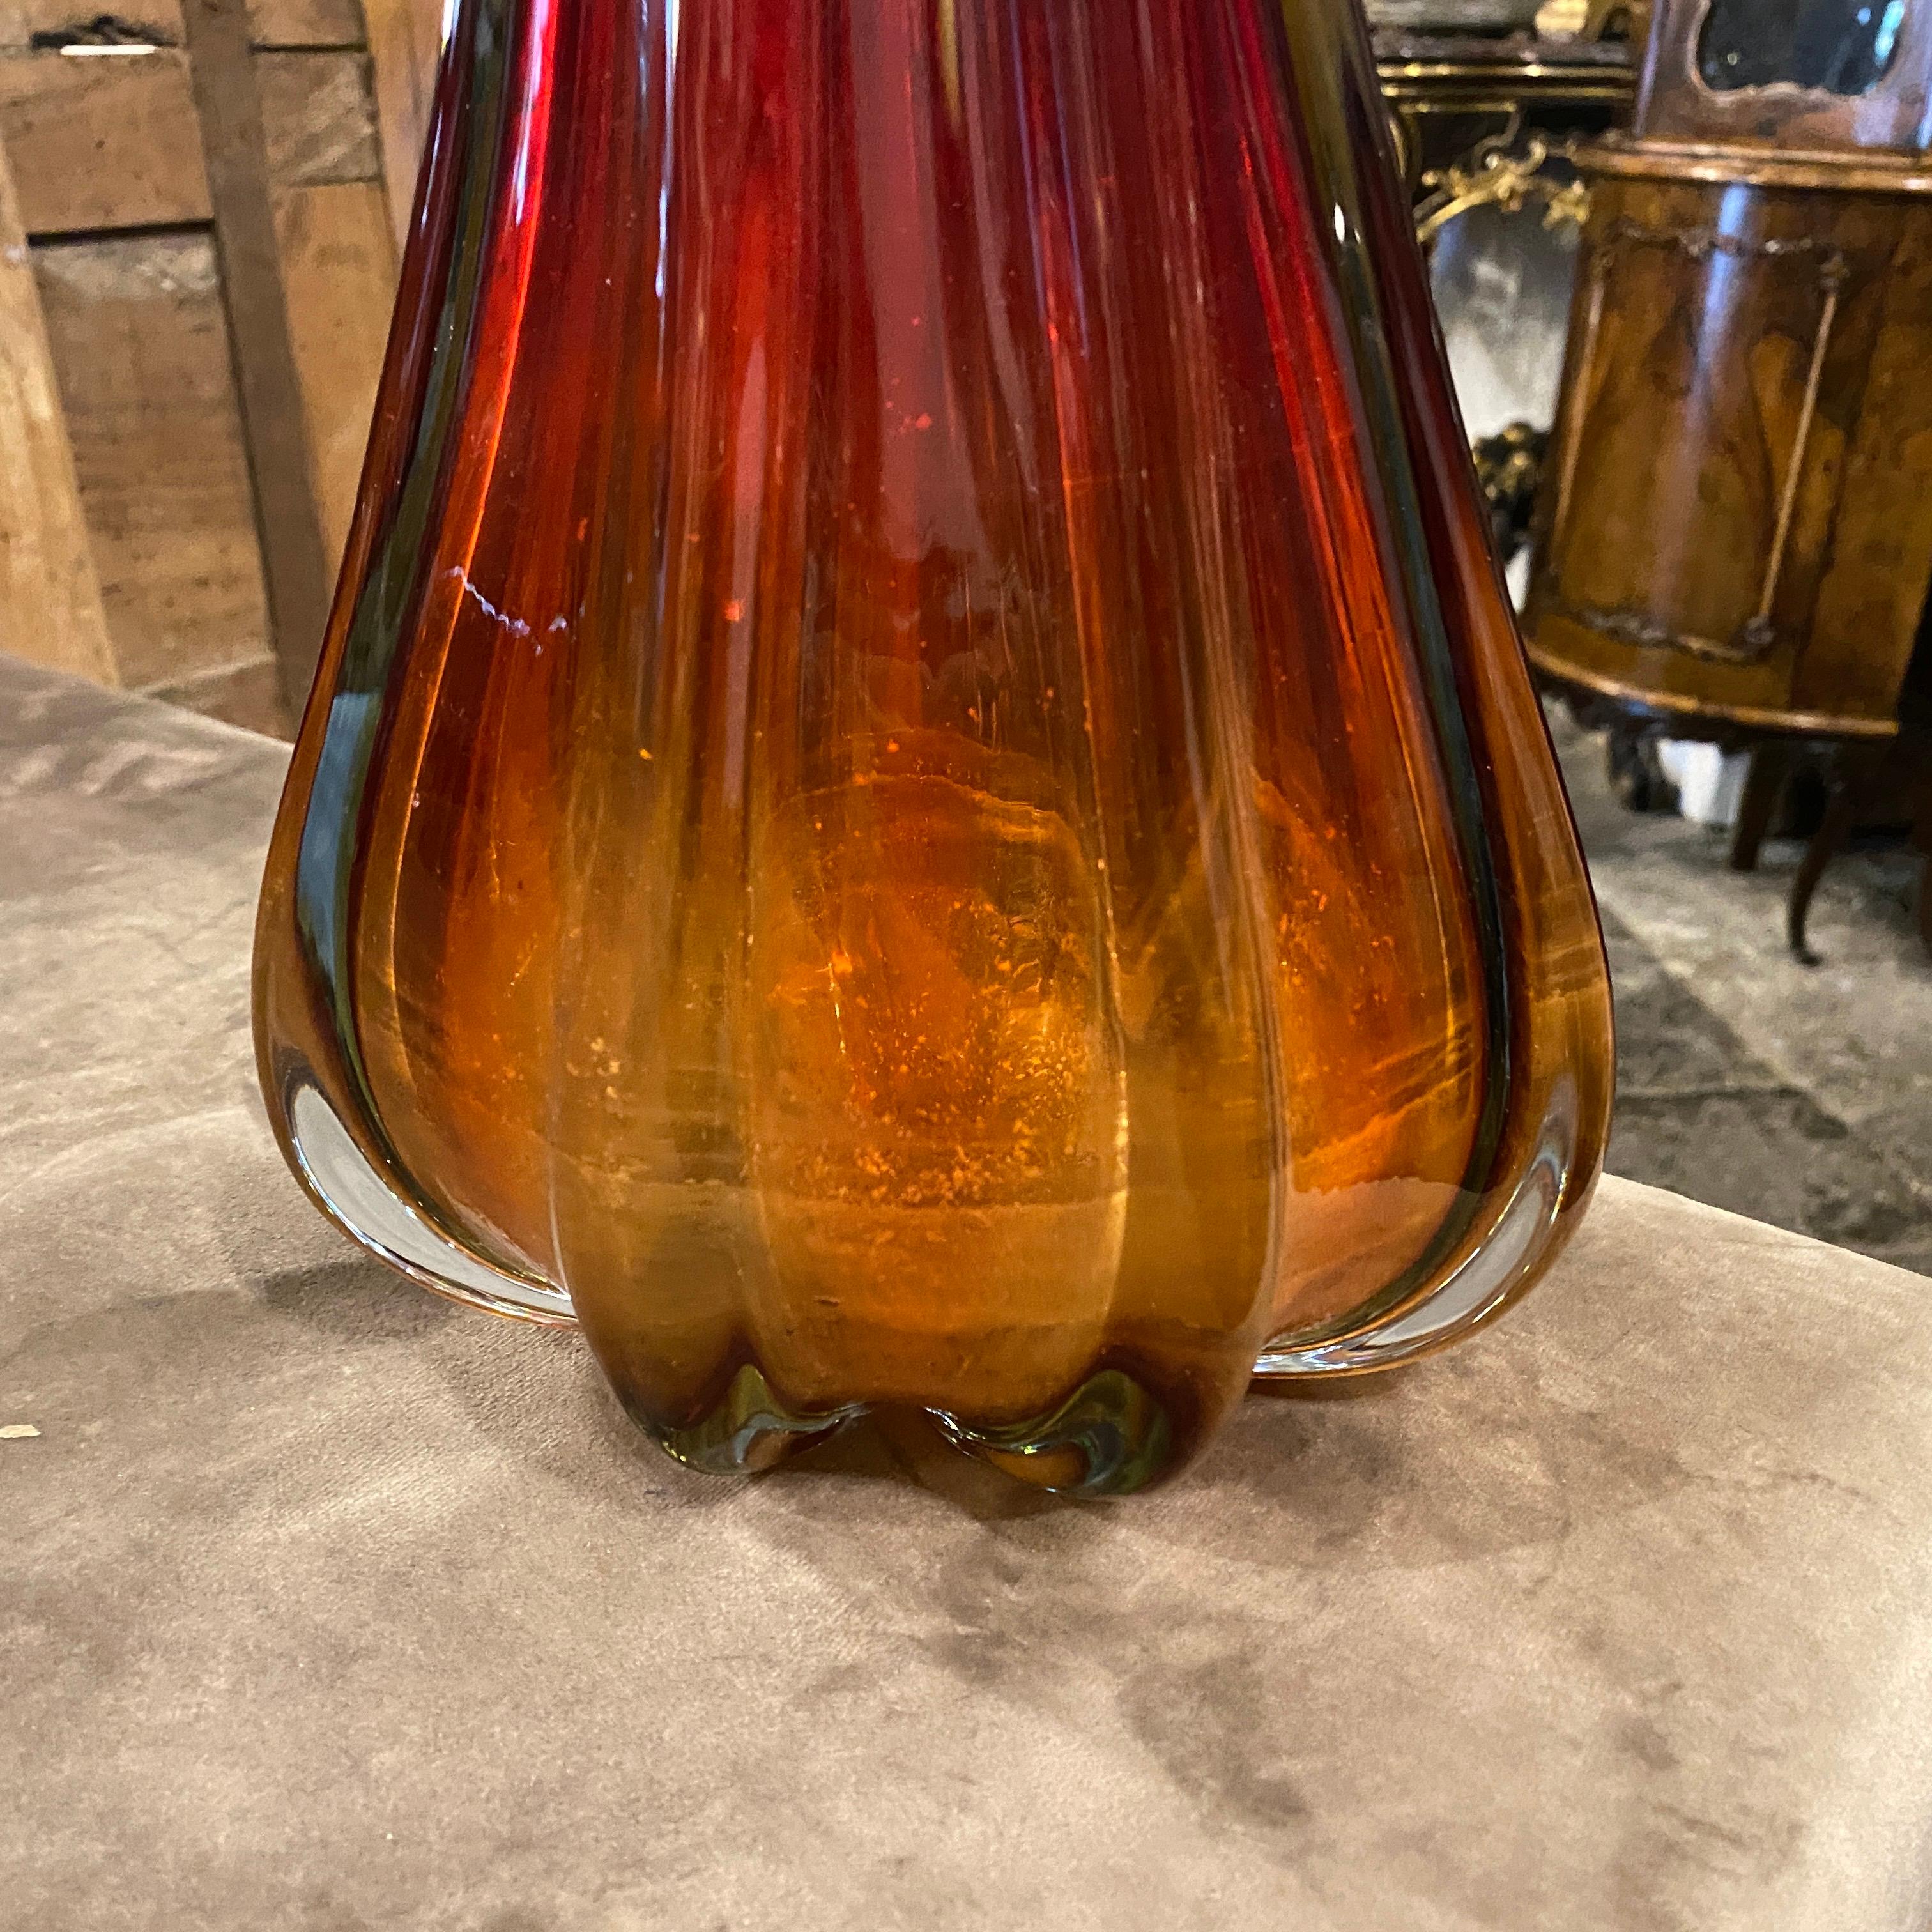 An iconic red and brown murano glass vase designed by Flavio Poli for Seguso in very good conditions. The vase exhibits distinct characteristics that reflect the design trends of that era, as well as the artistic sensibility of Flavio Poli, an